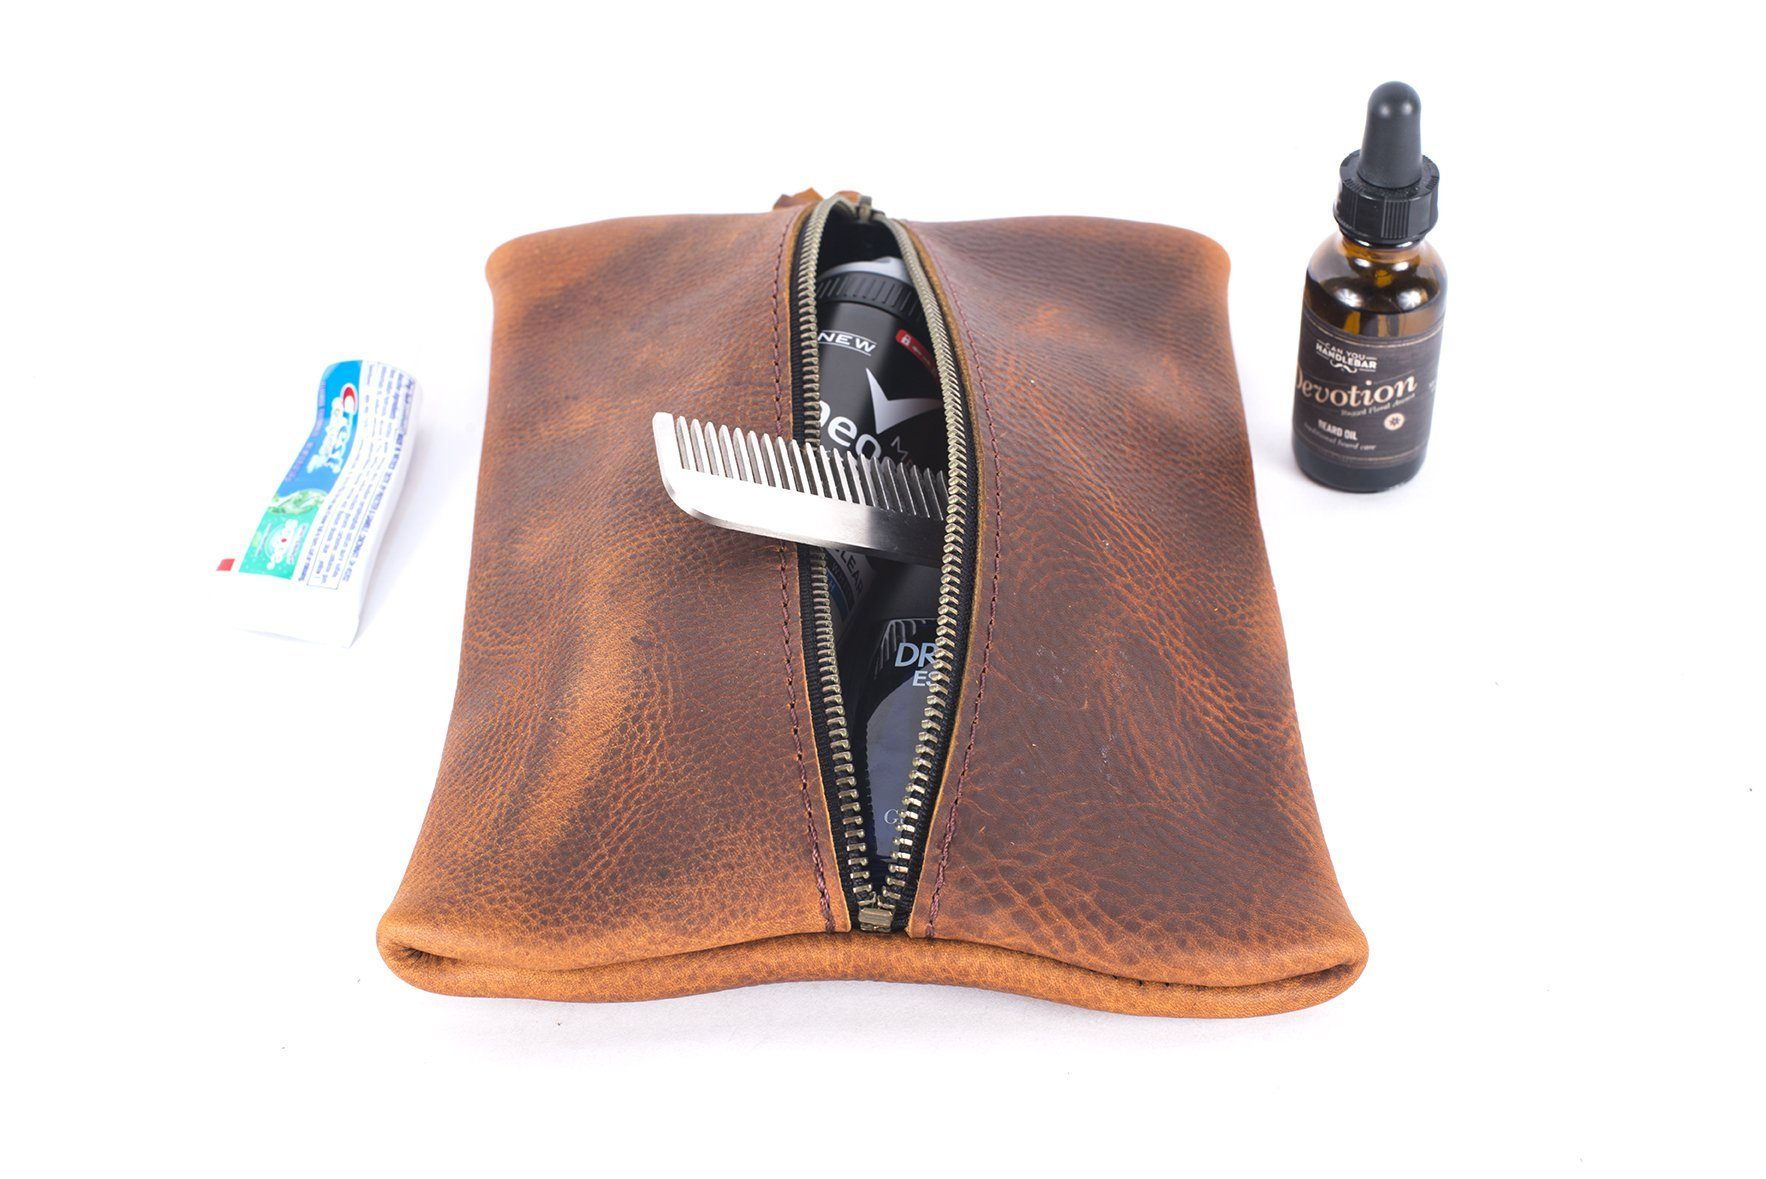 FLAT PACK ZIPPERED LEATHER POUCH